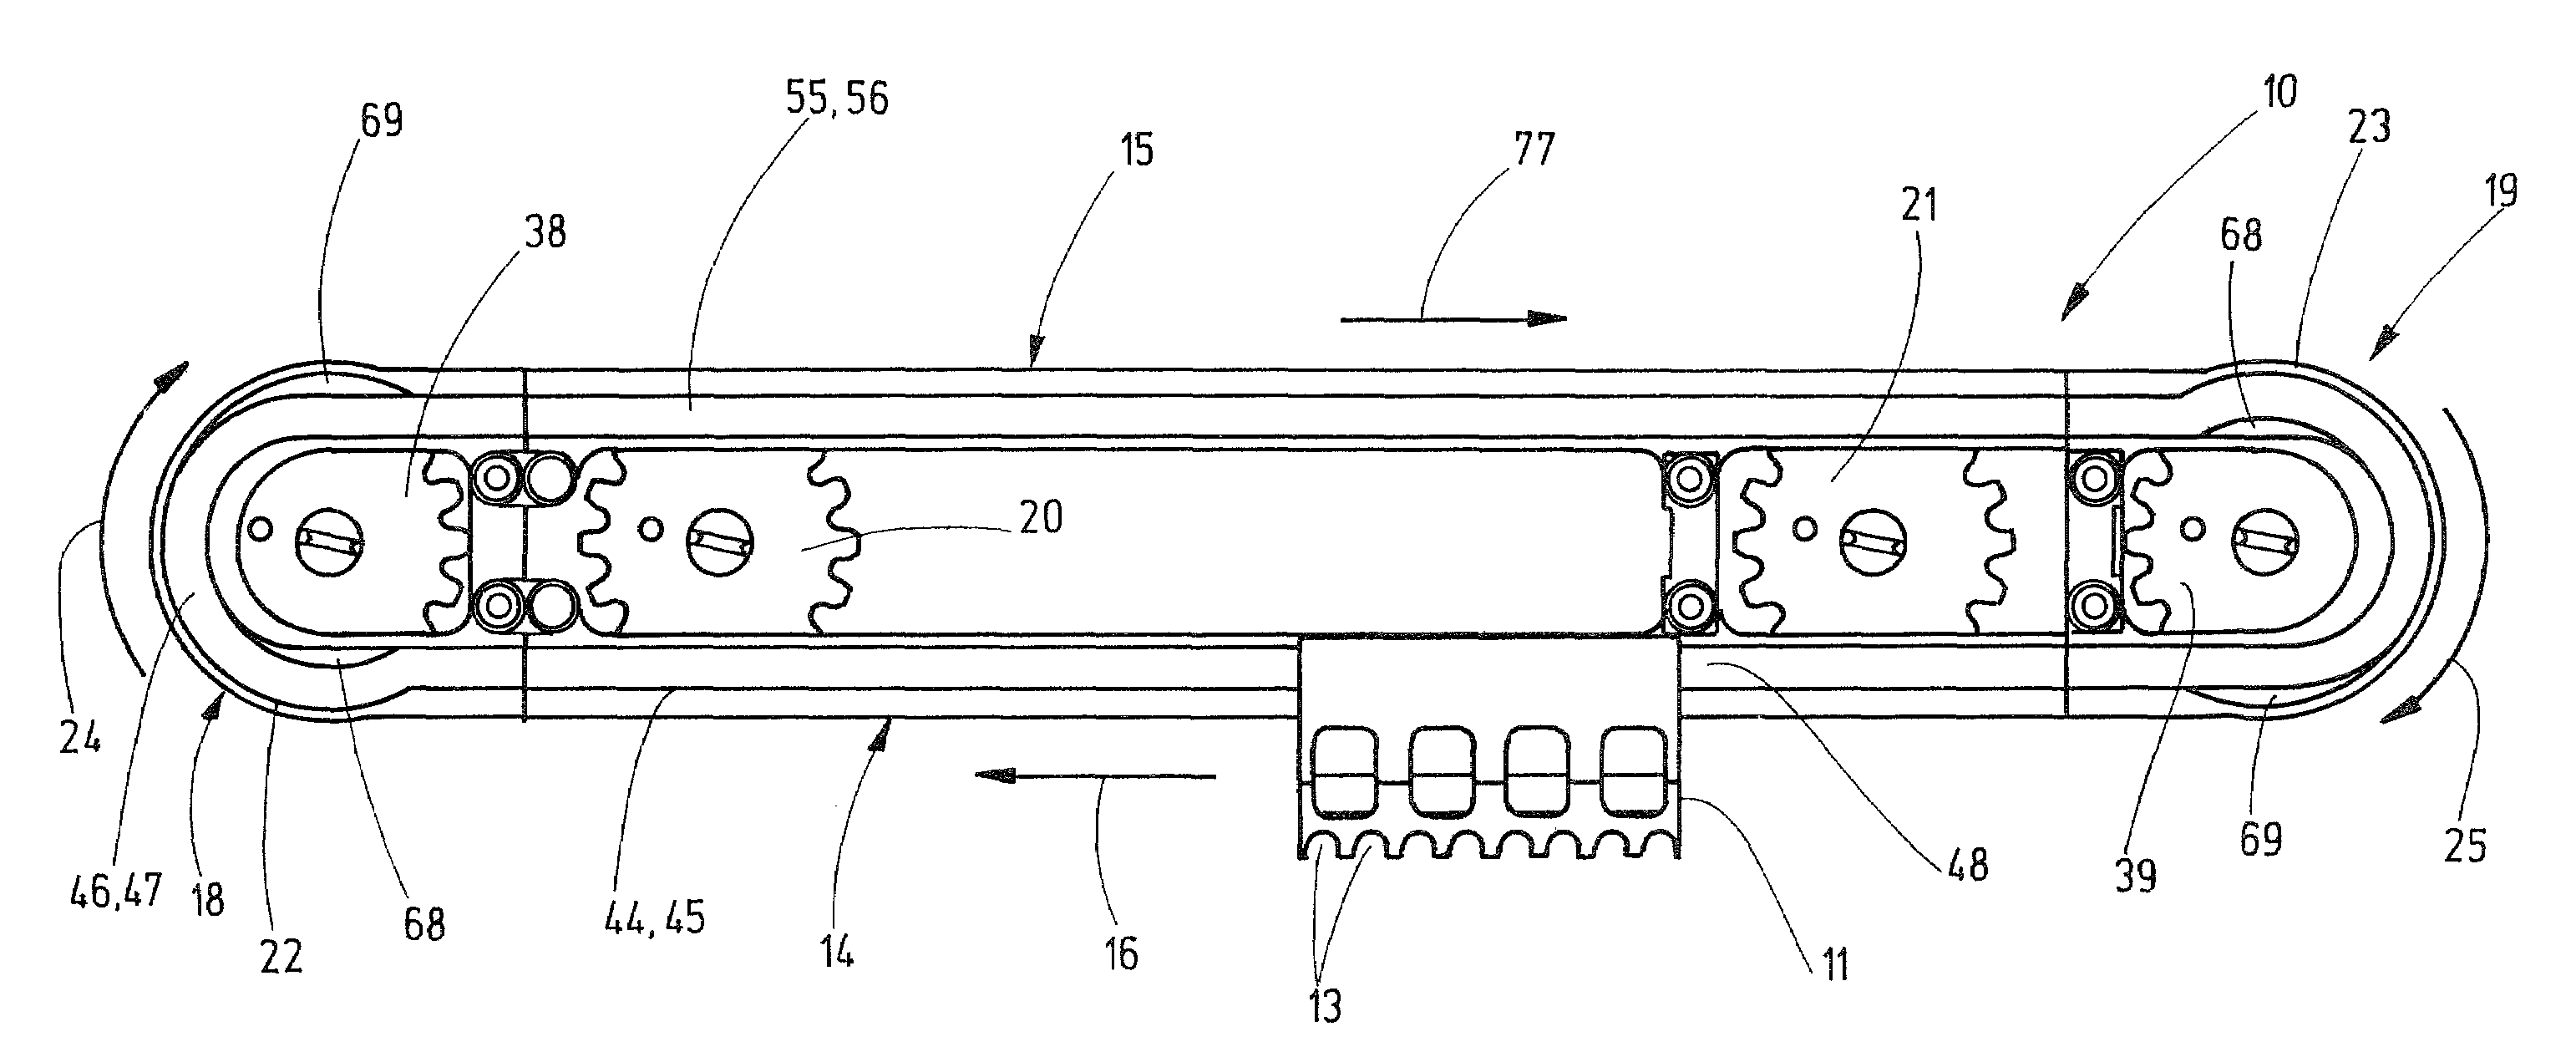 Apparatus for transporting containers to at least one processing station